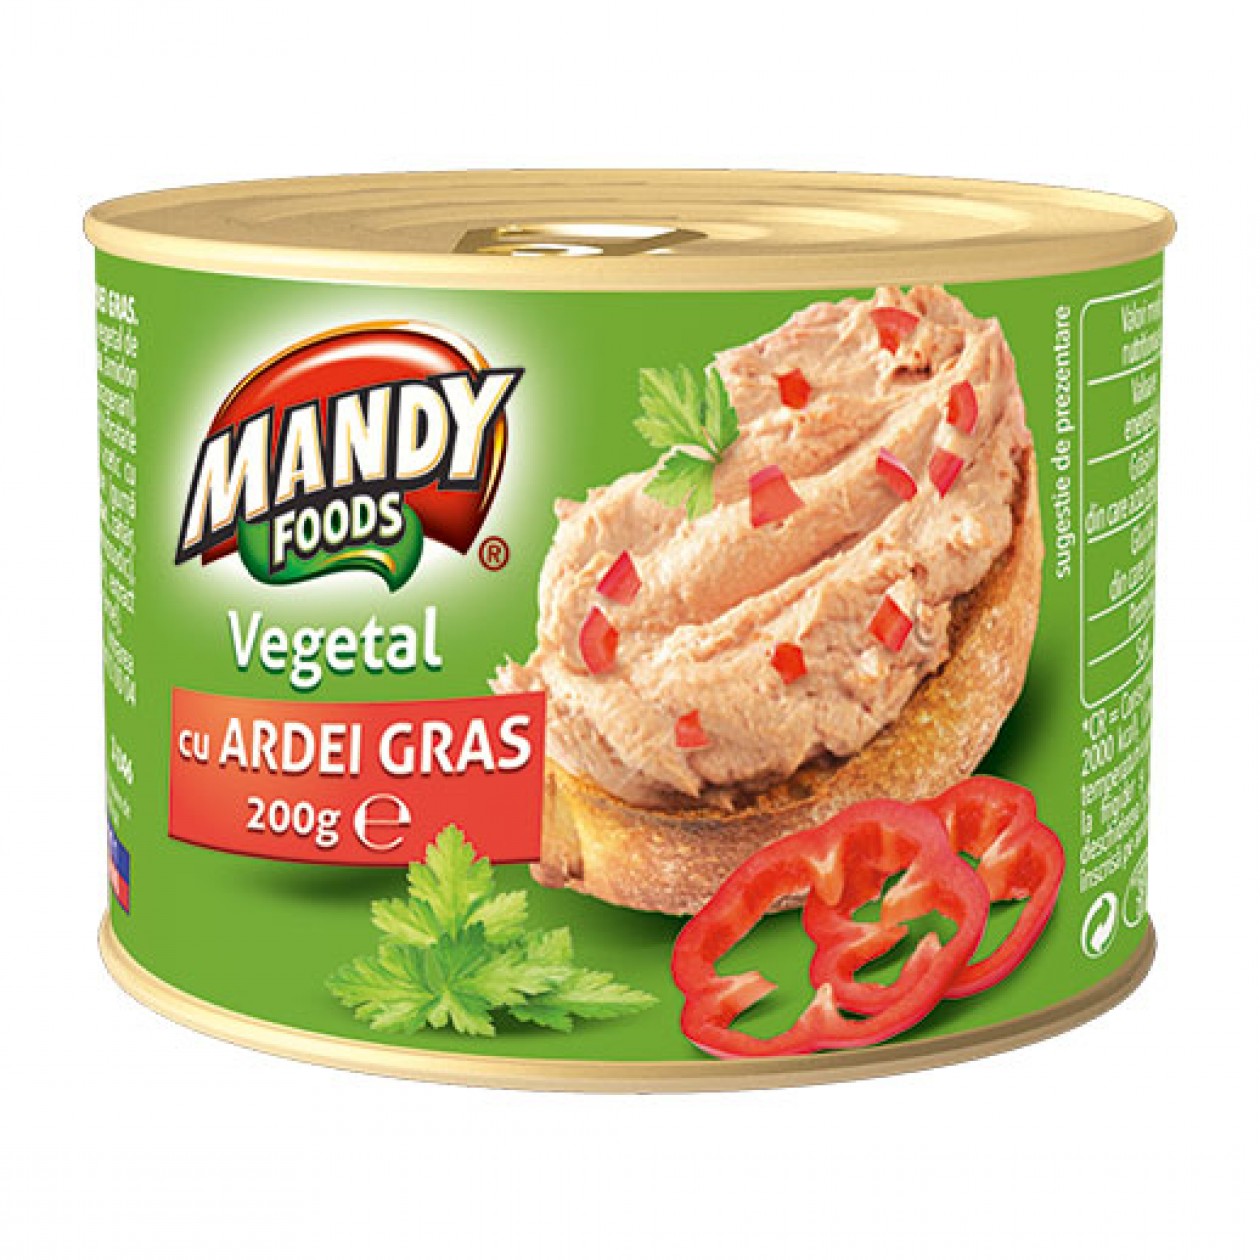 Mandy Foods Pate Veg. with Red Pepper 6 x 200g